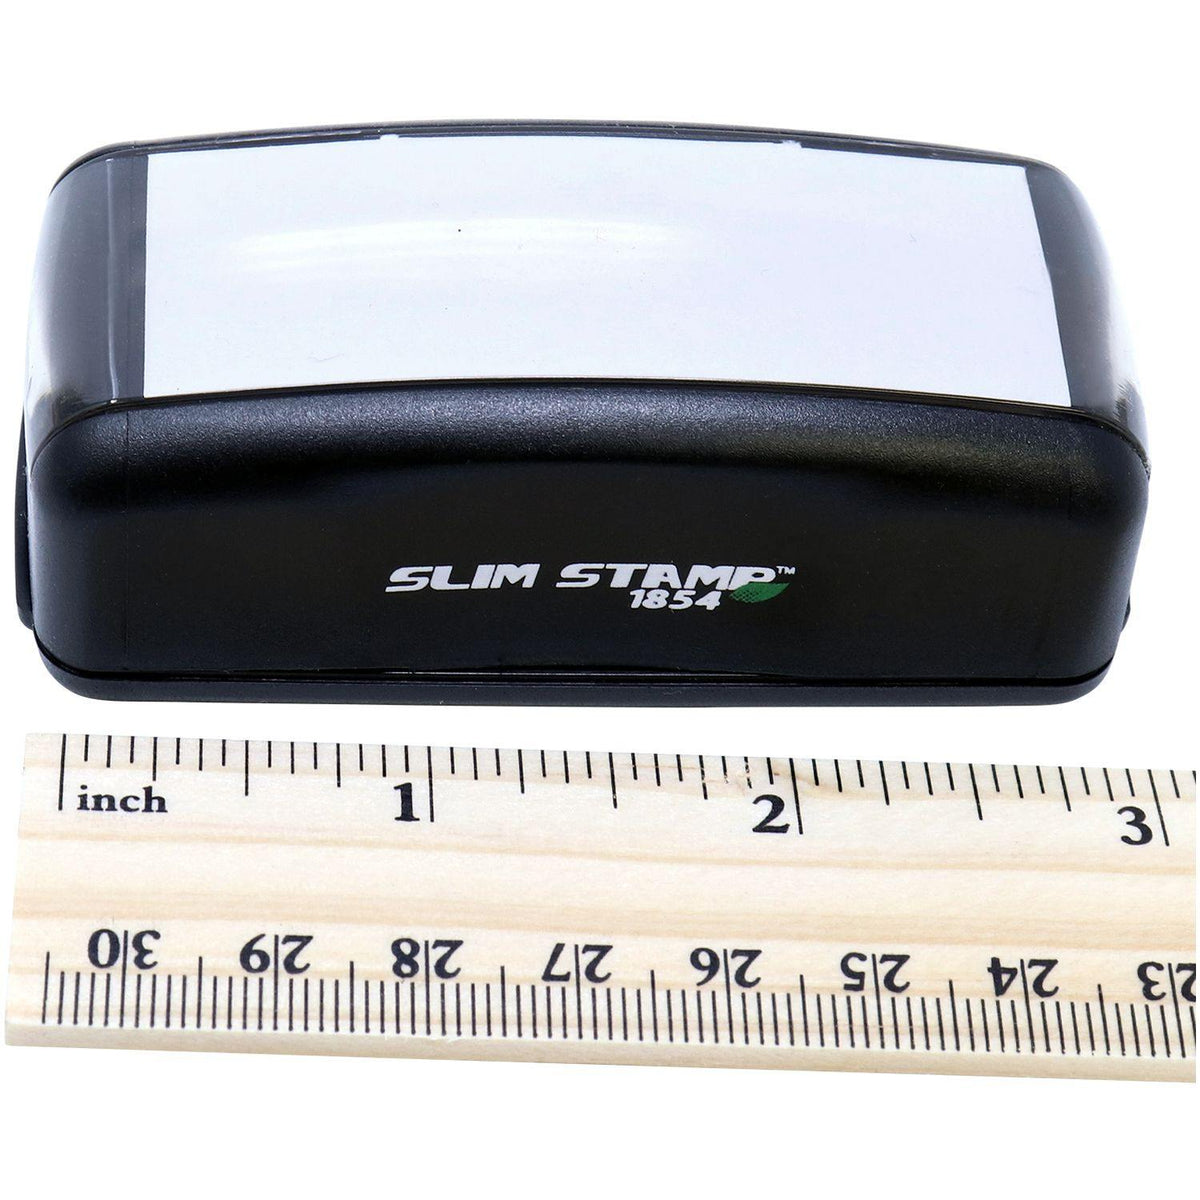 Measurement Large Pre Inked Secure Stamp with Ruler